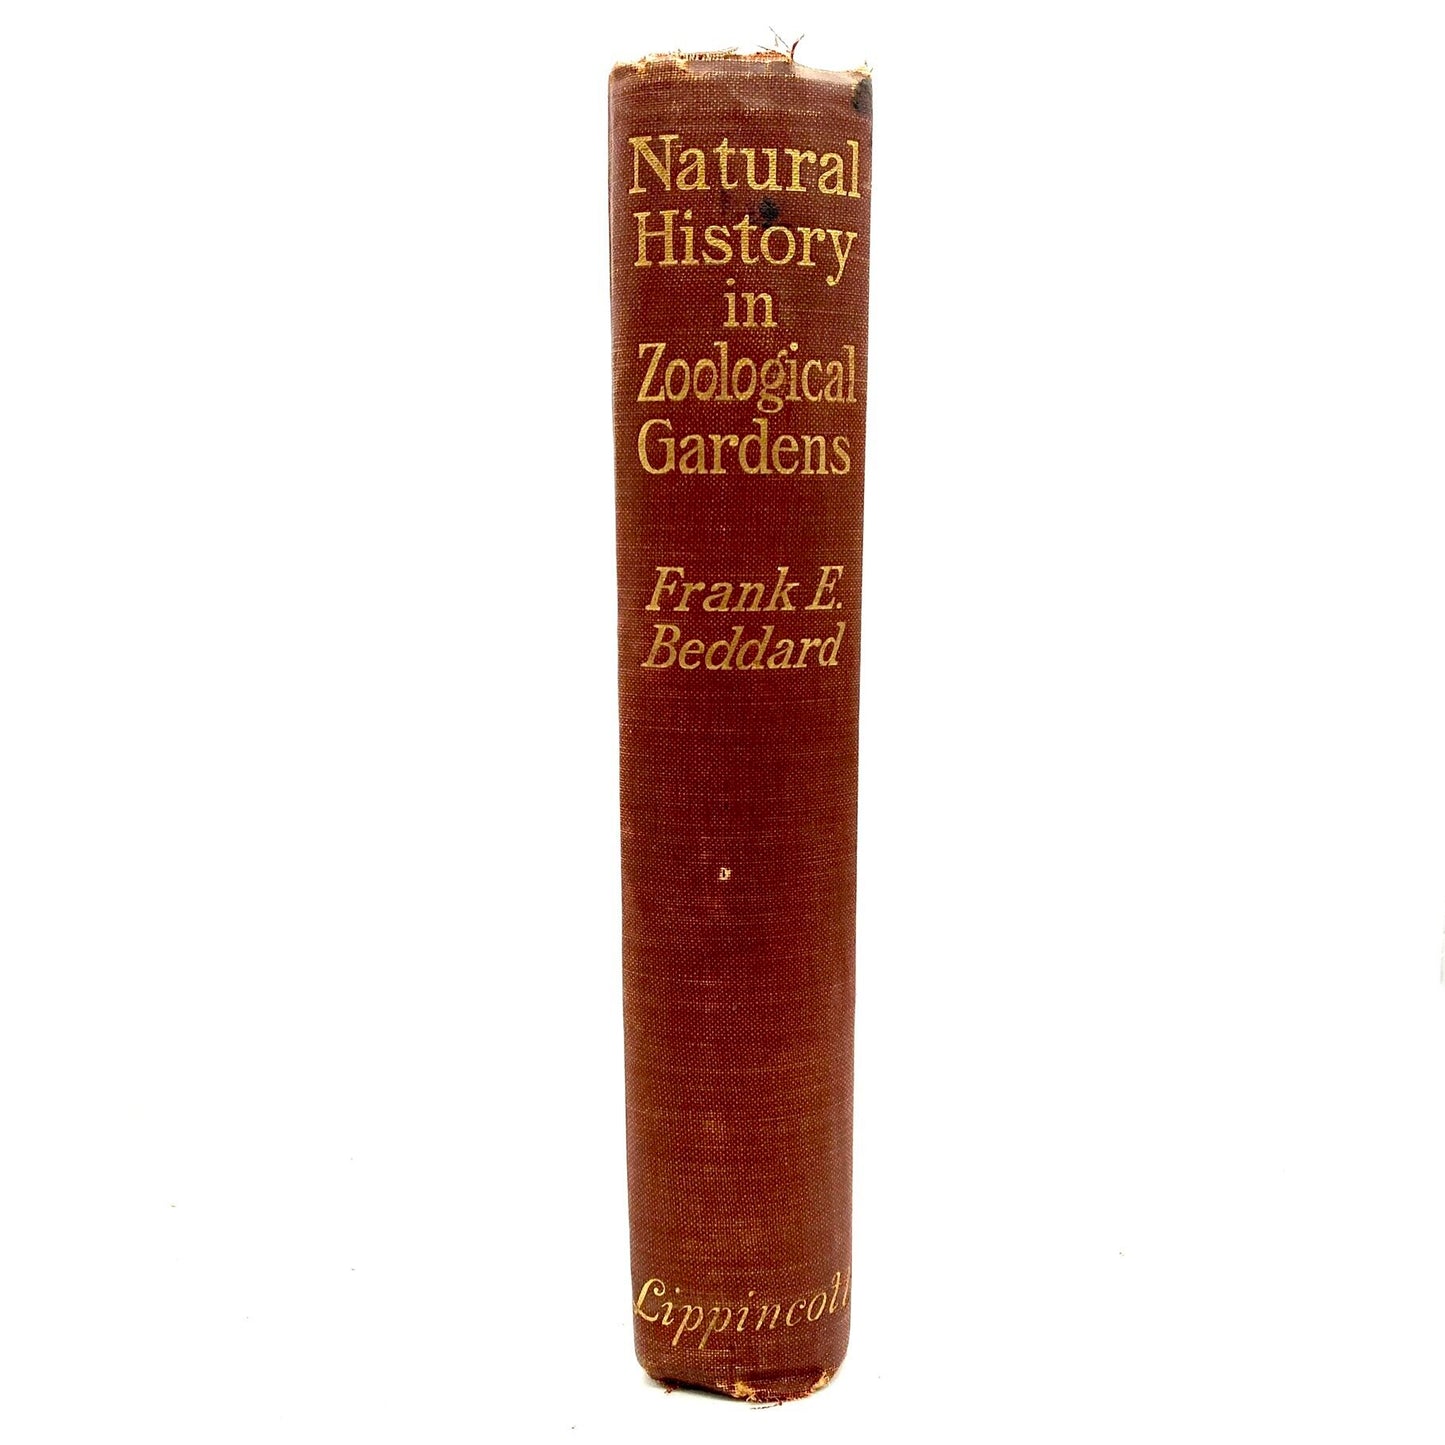 BEDDARD, Frank E. "Natural History in Zoological Gardens" [Lippincott, 1905] - Buzz Bookstore